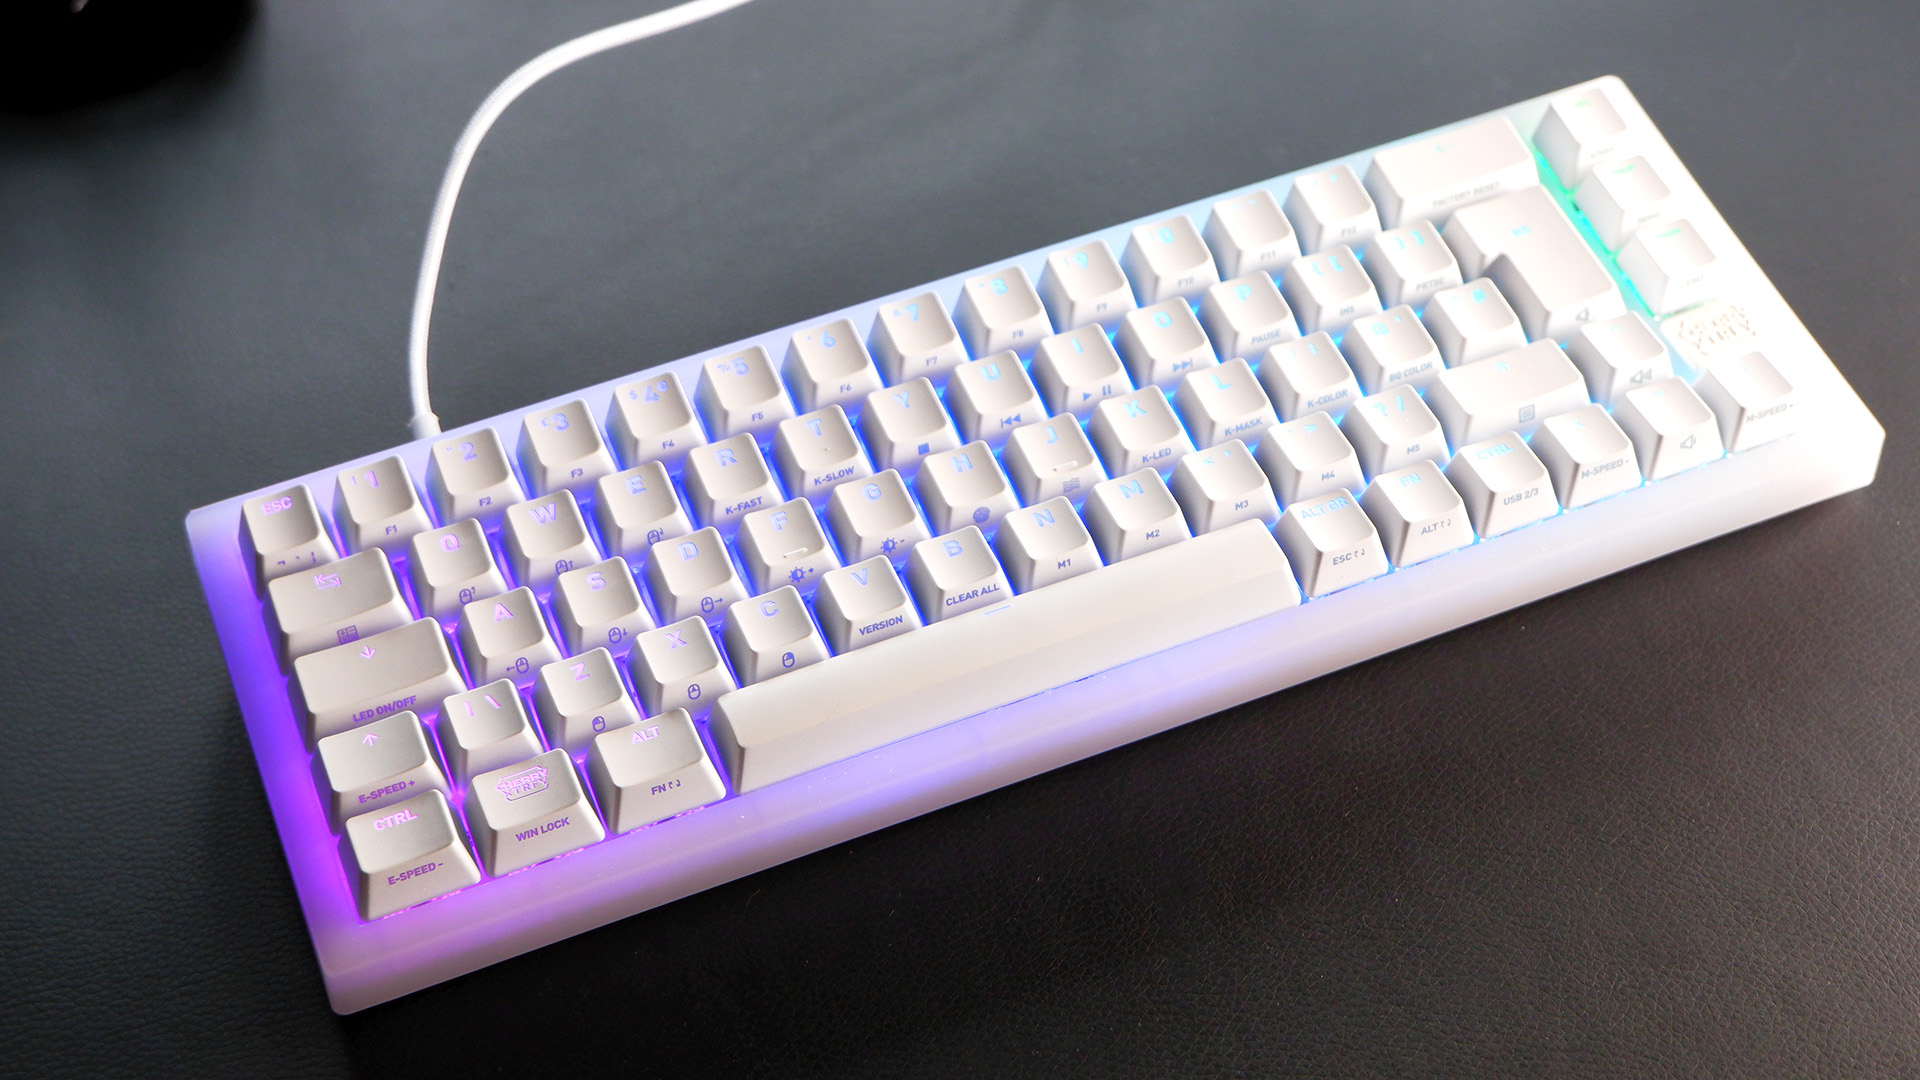 The Cherry K5V2 gaming keyboard with new Cherry MX2A switches on a desk.